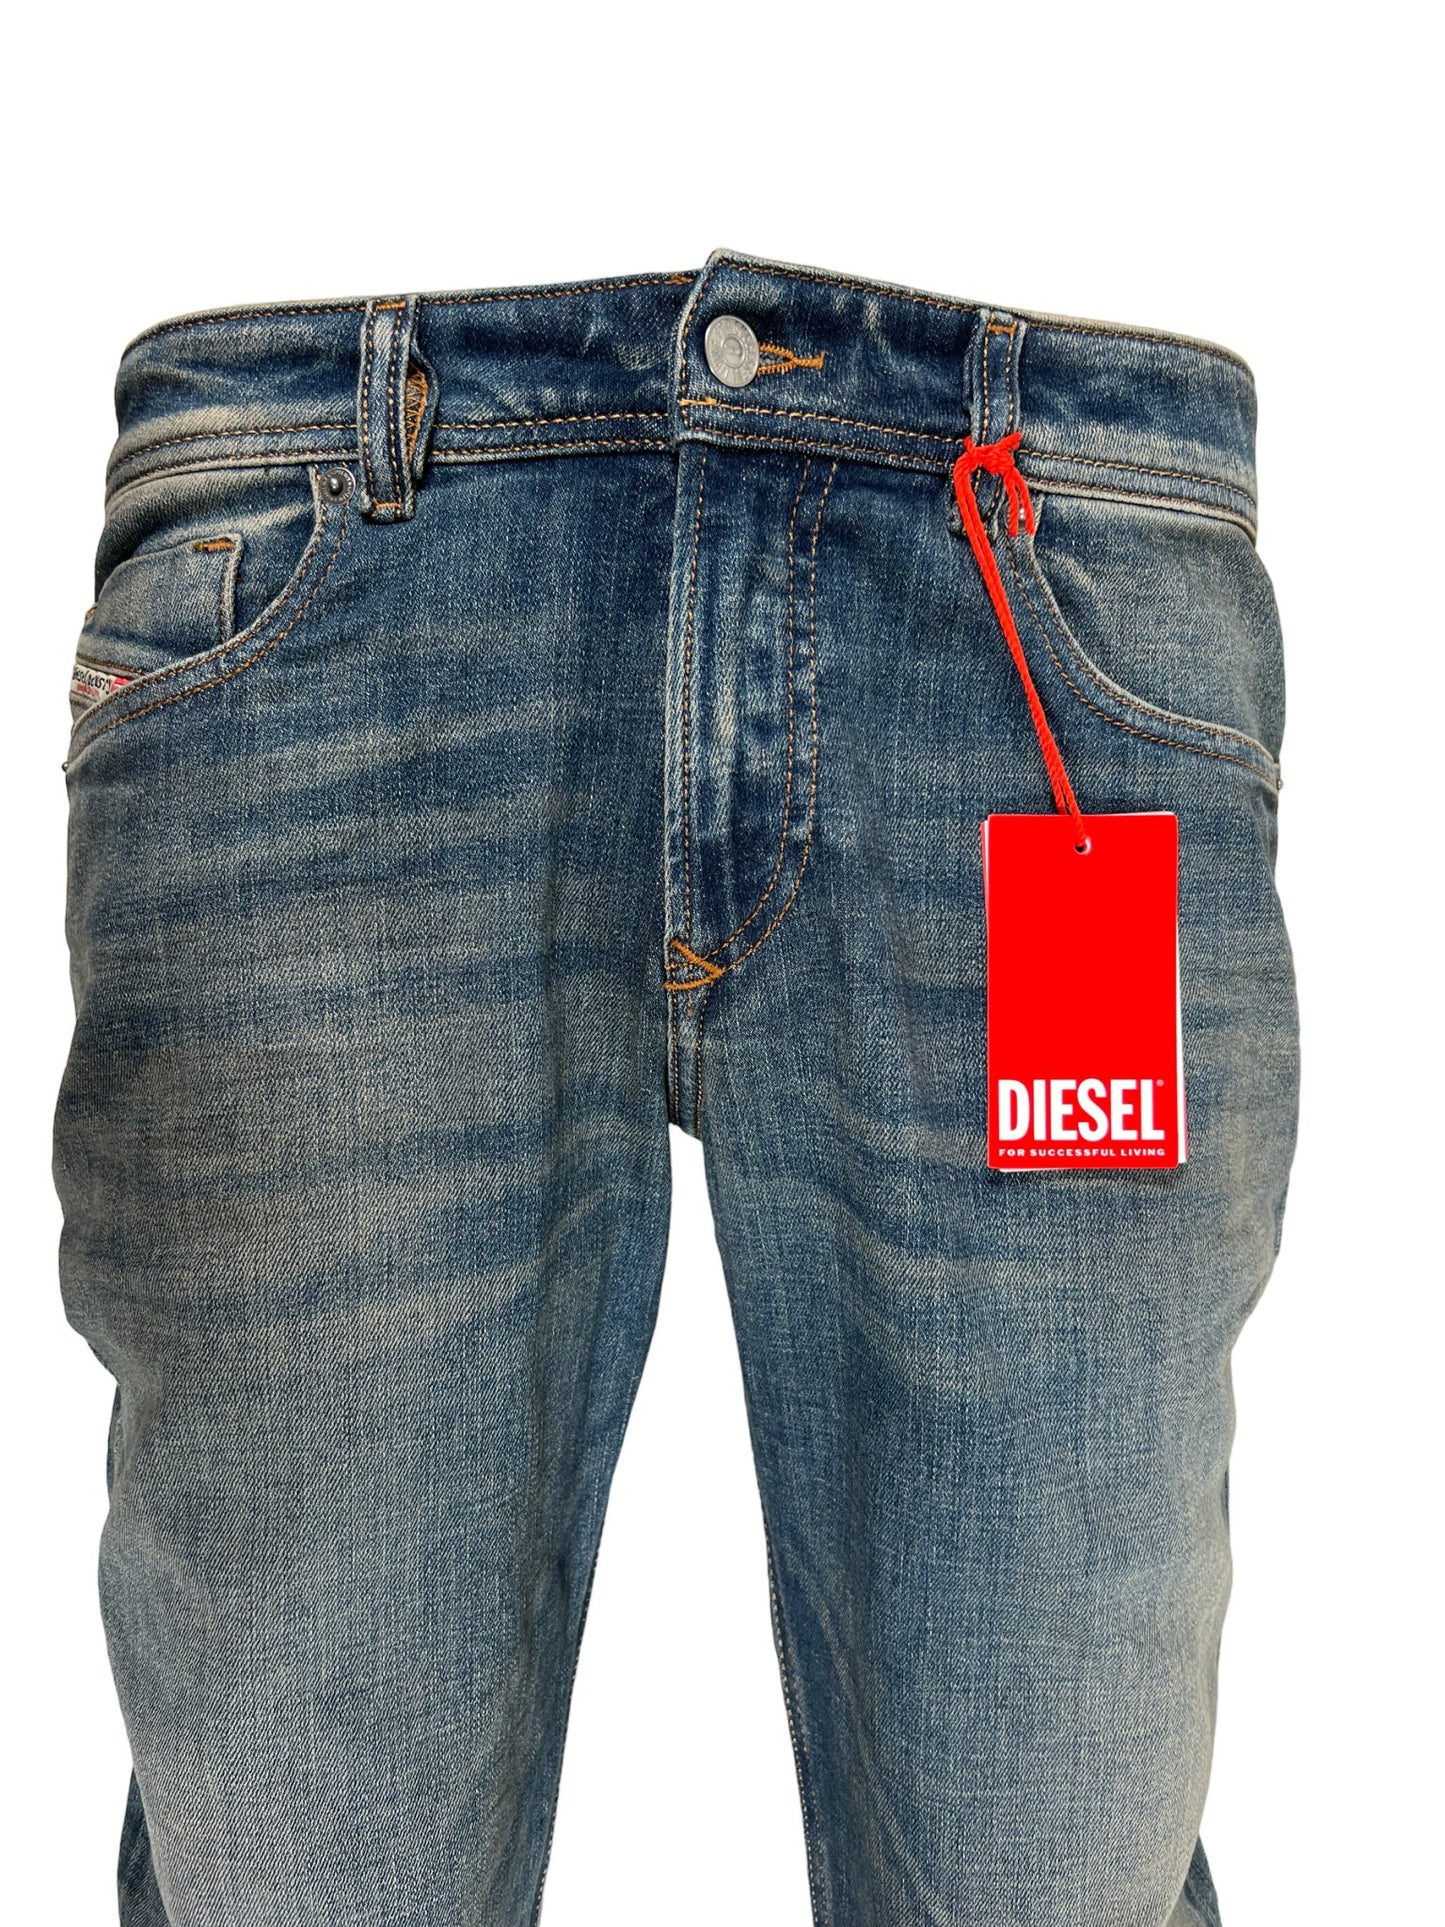 A pair of DIESEL 2019 D-STRUKT 9H49 DENIM jeans with a red tag on them.